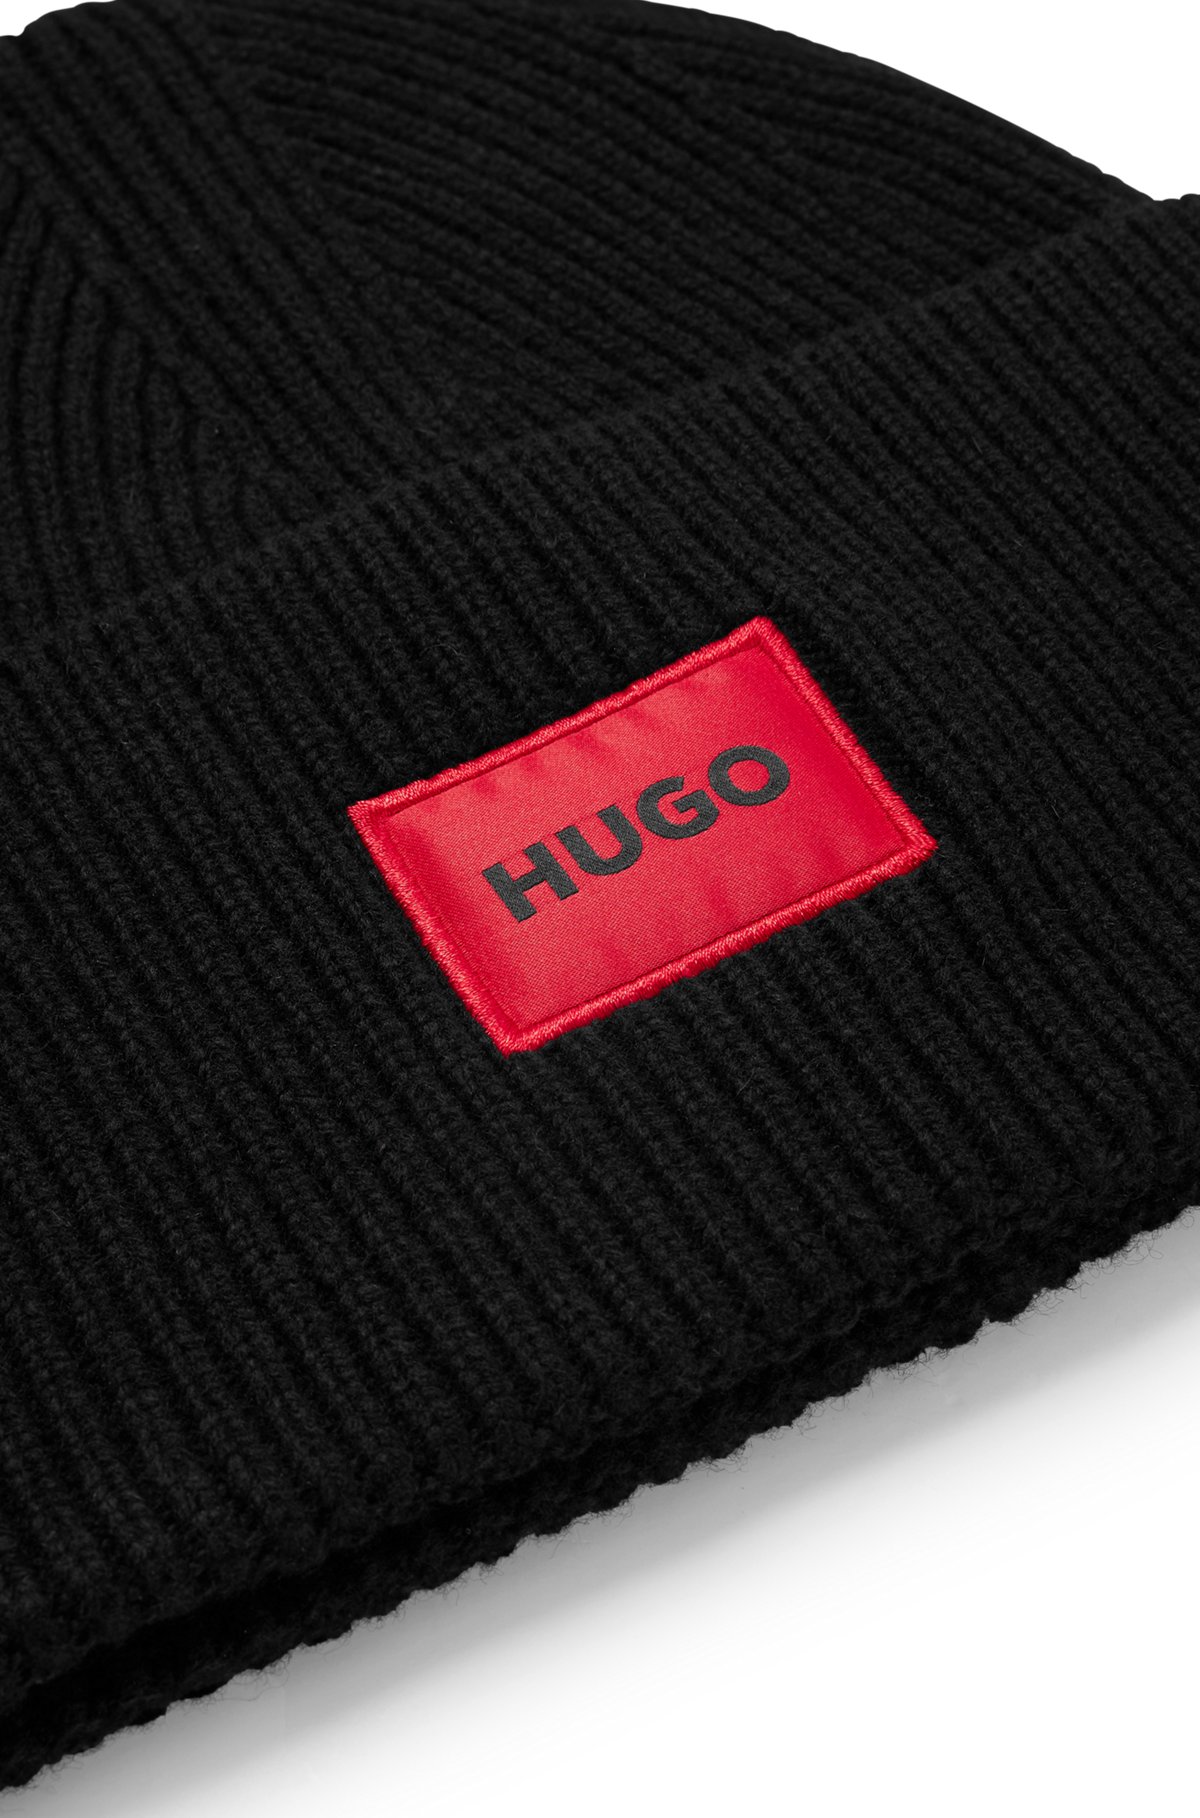 HUGO - Wool-blend beanie hat with red logo label